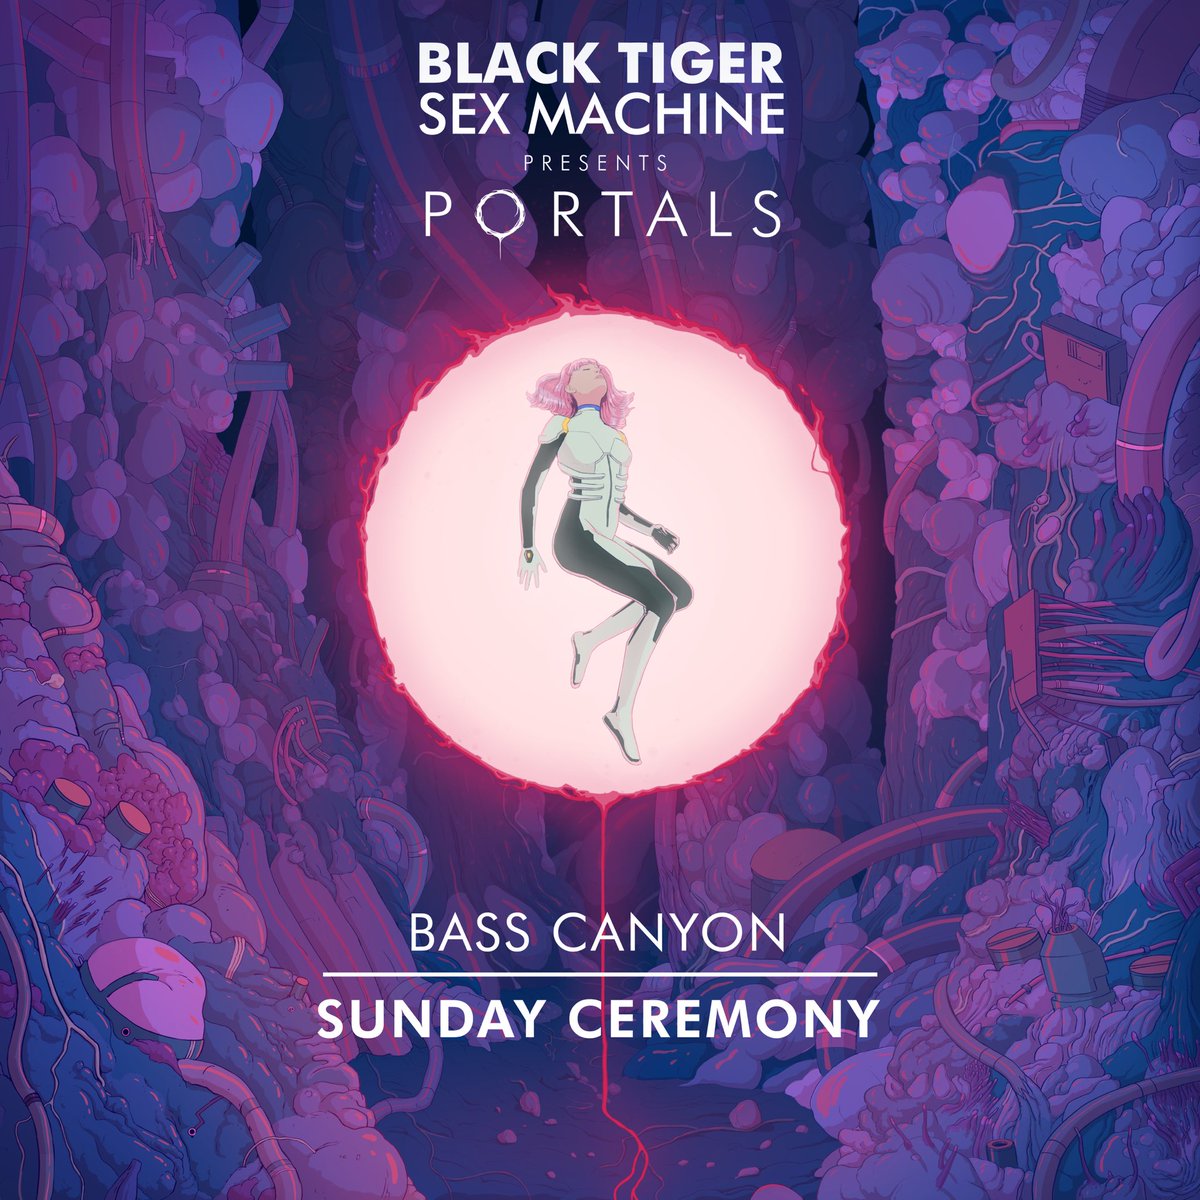 Surprise! In exactly one week we will be performing Portals at Bass Canyon 🙏🏼